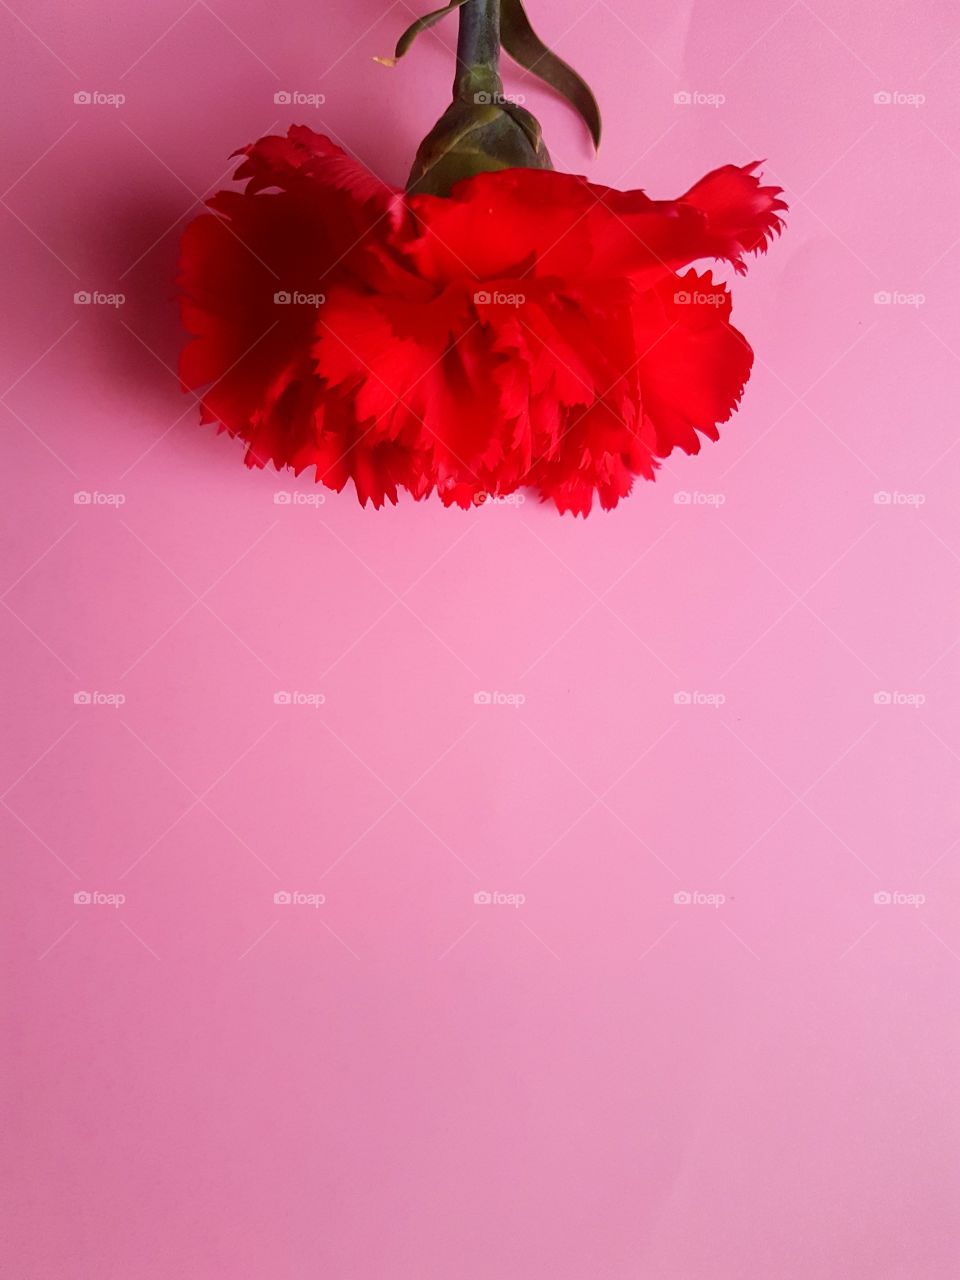 Red flower on pink background